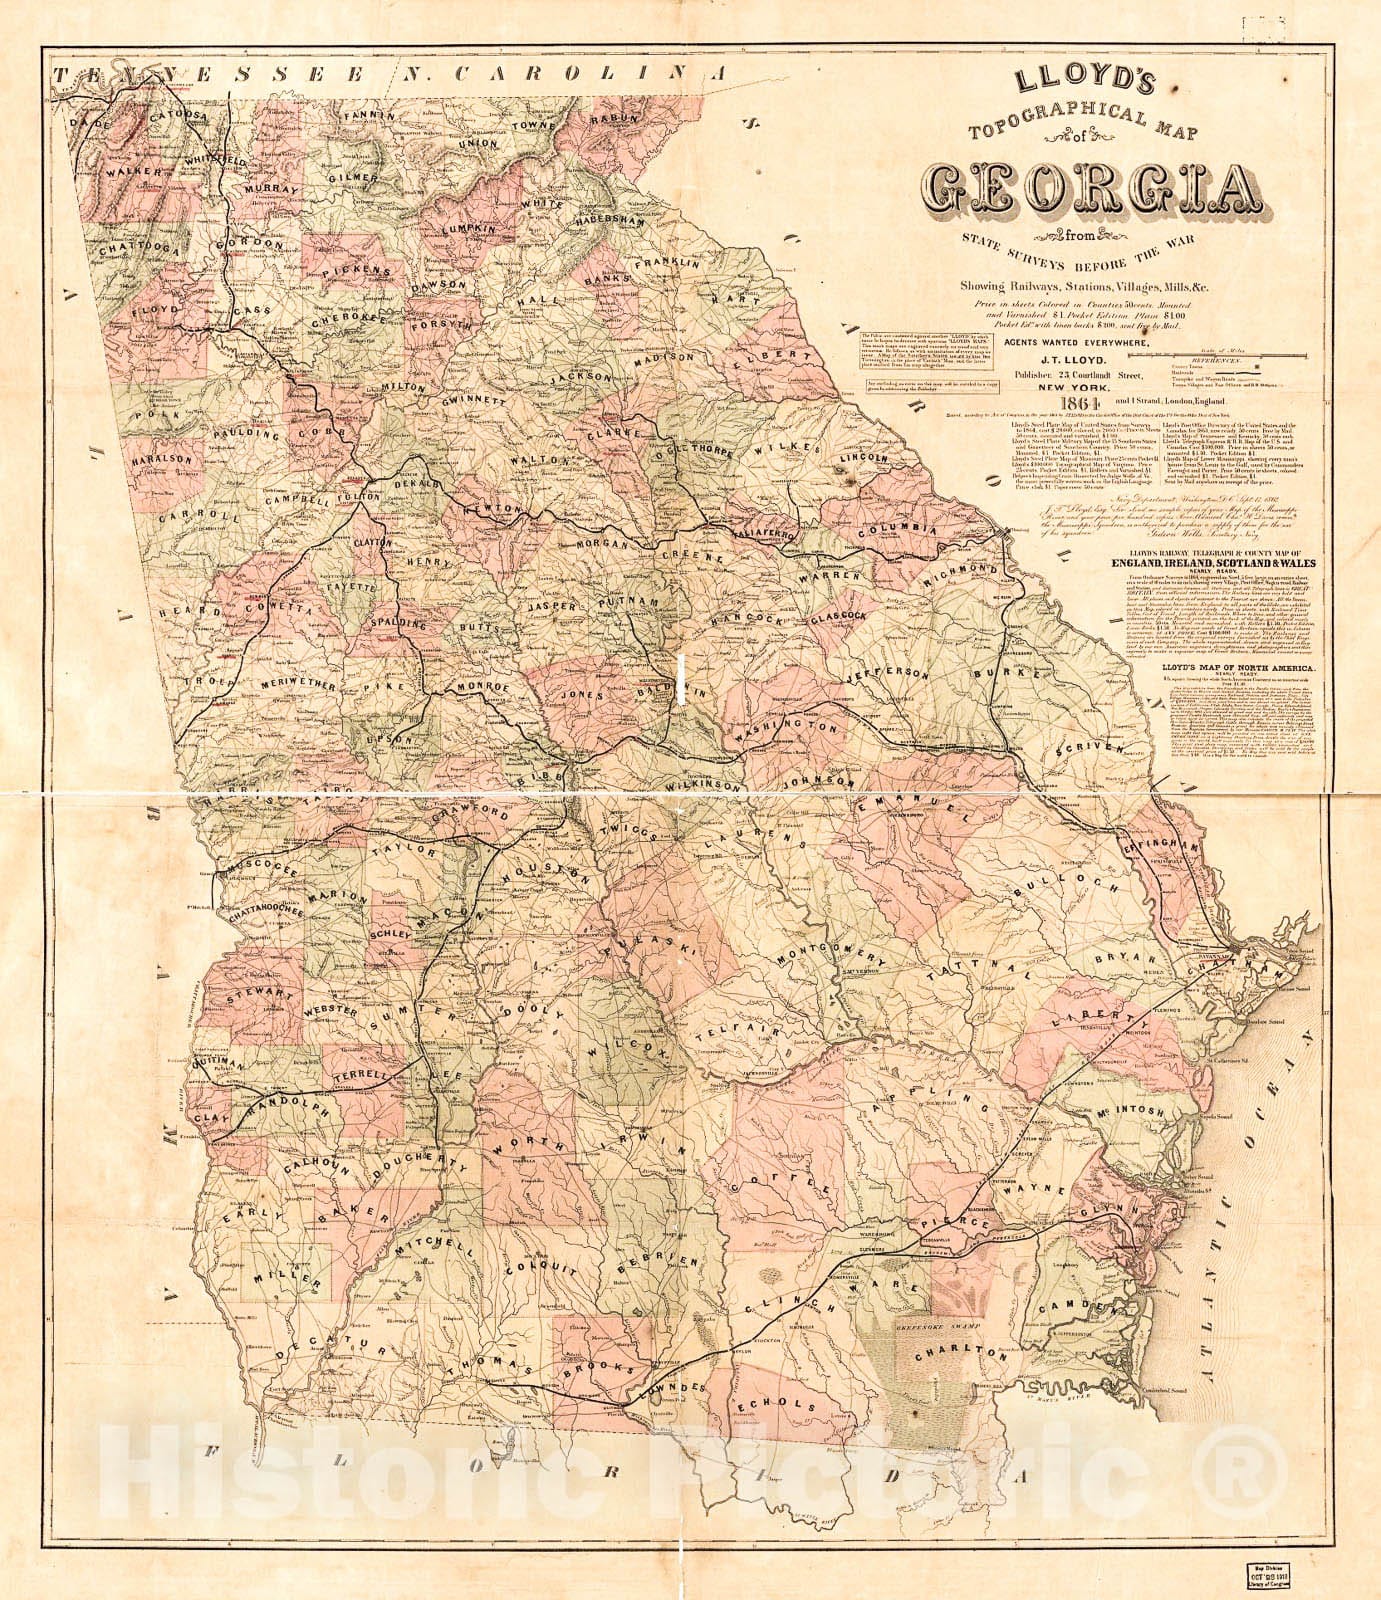 Historic 1864 Map - Lloyd's Topographical map of Georgia from State surveys Before The war Showing Railways, Stations, Villages, Mills, c.